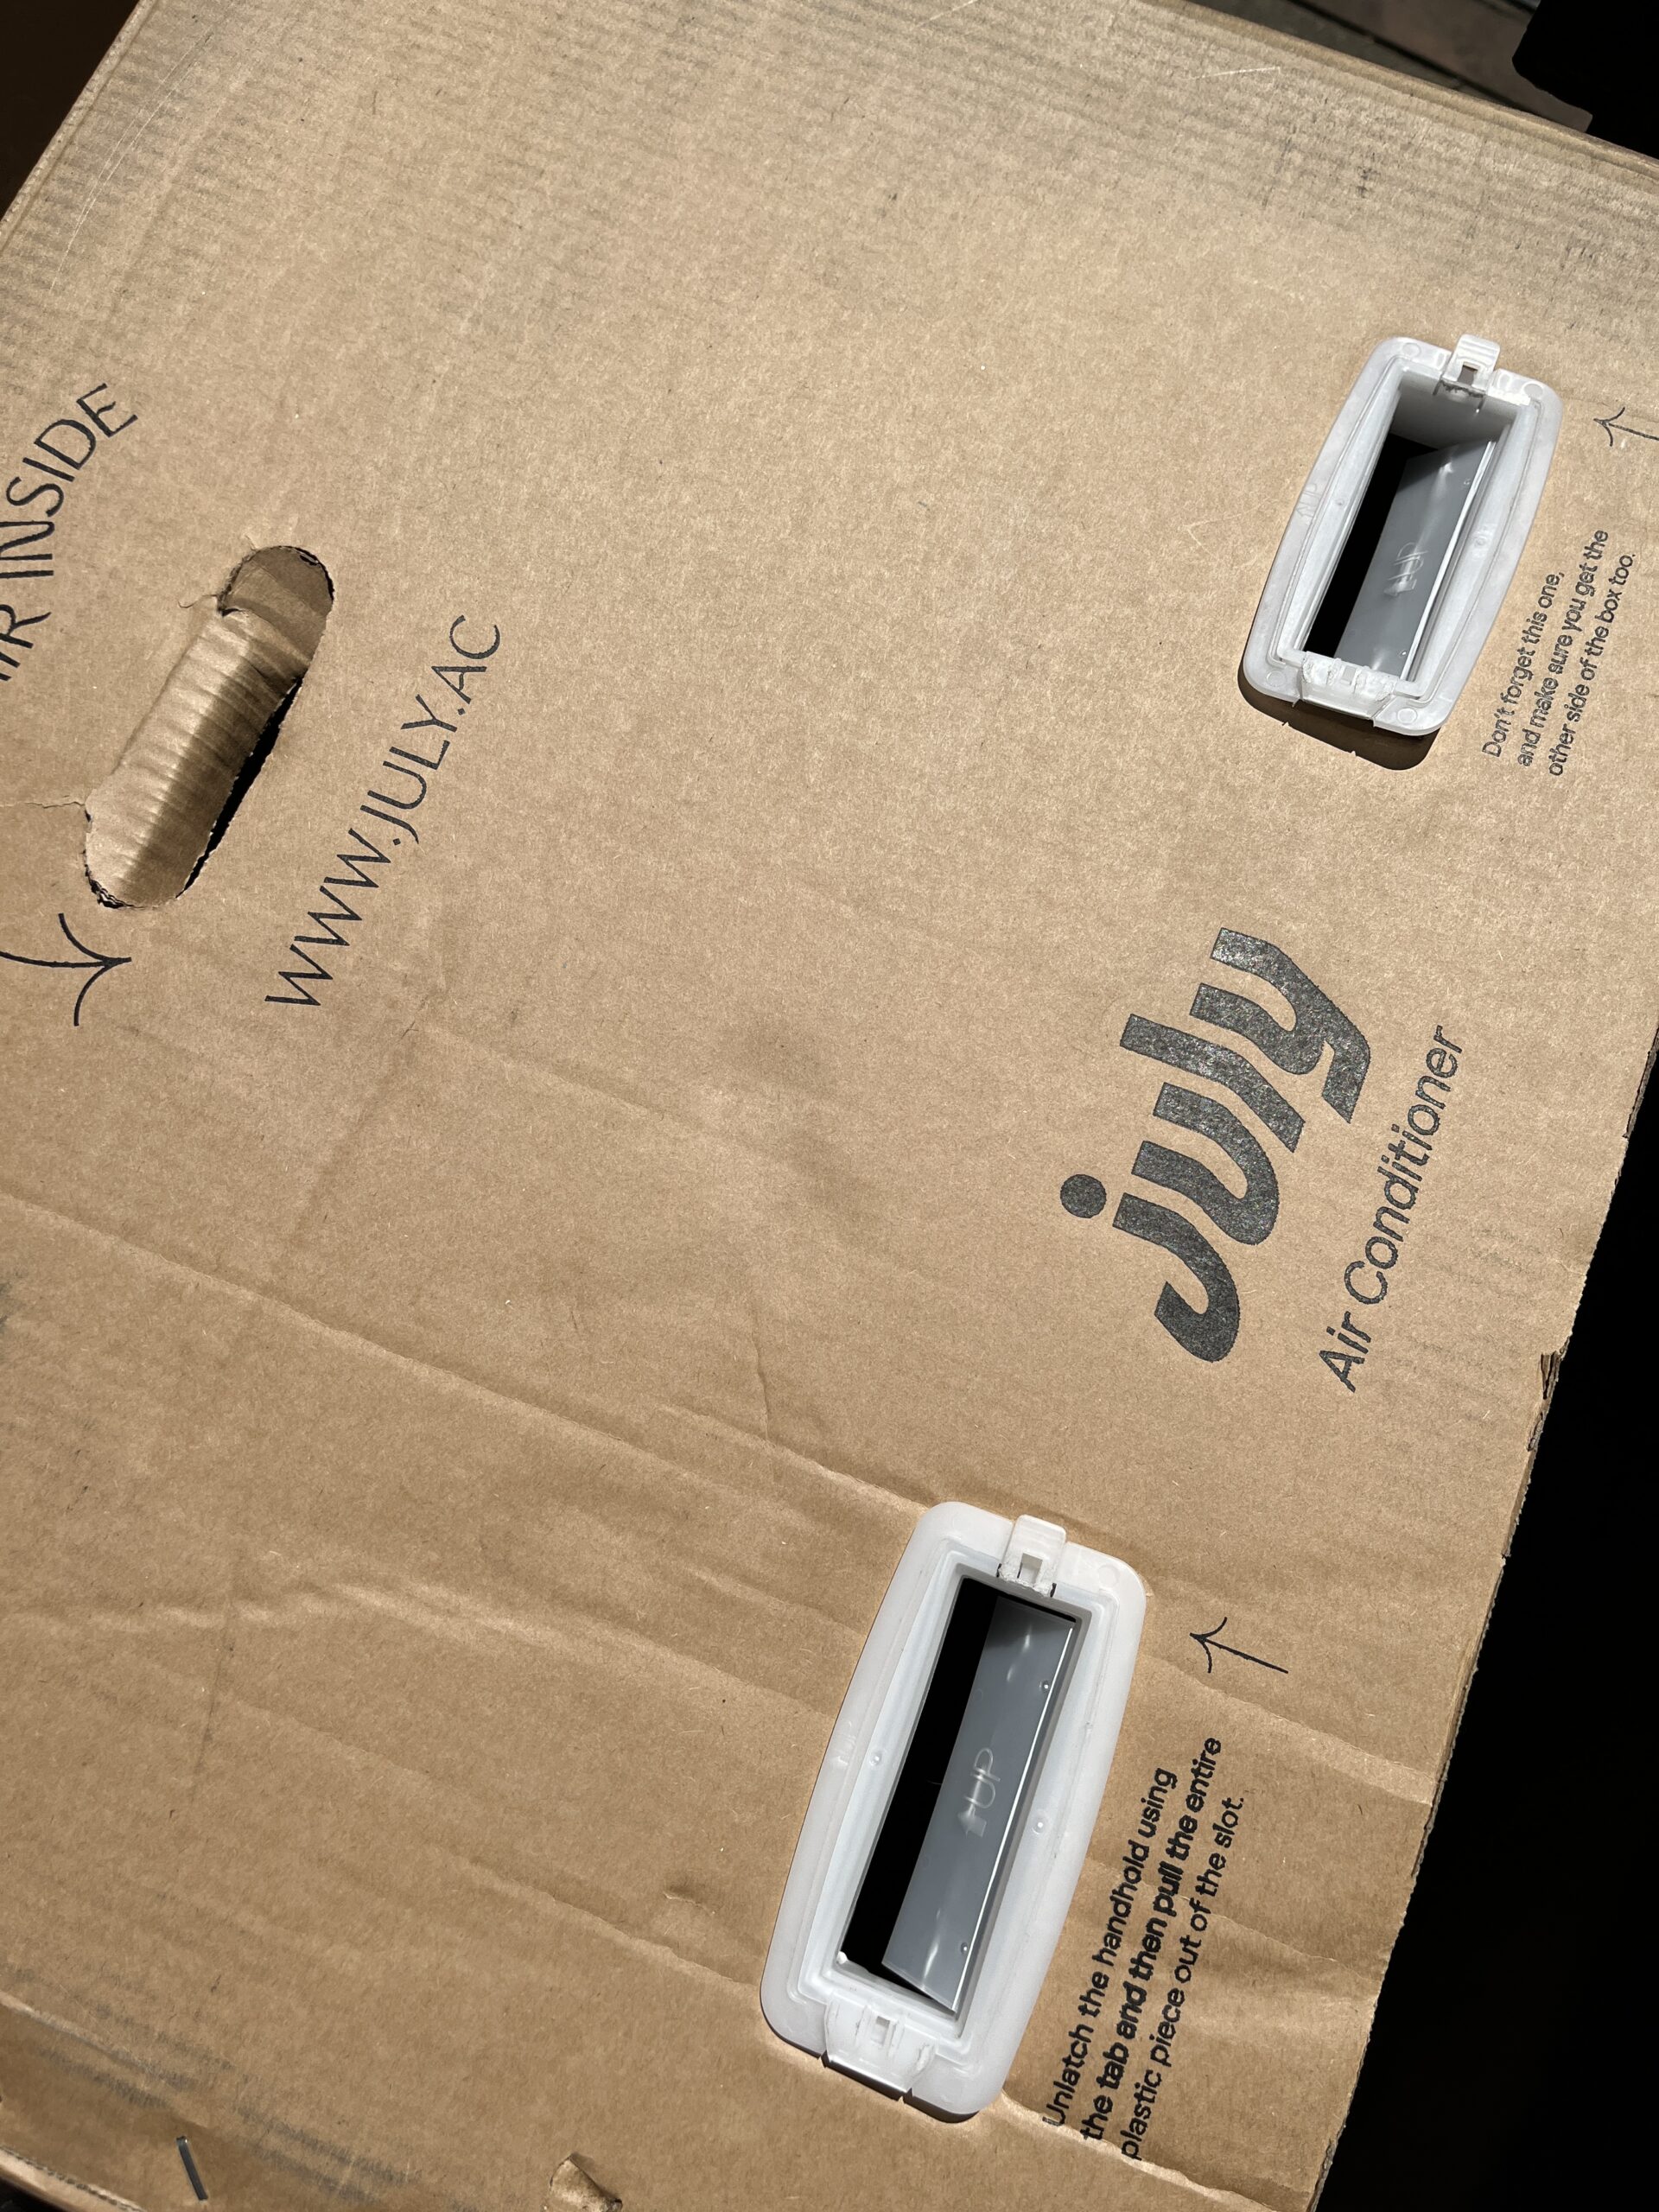 Cardboard box with "July Air Conditioner" printed, including handles on the sides and the website URL www.JULY-AC.